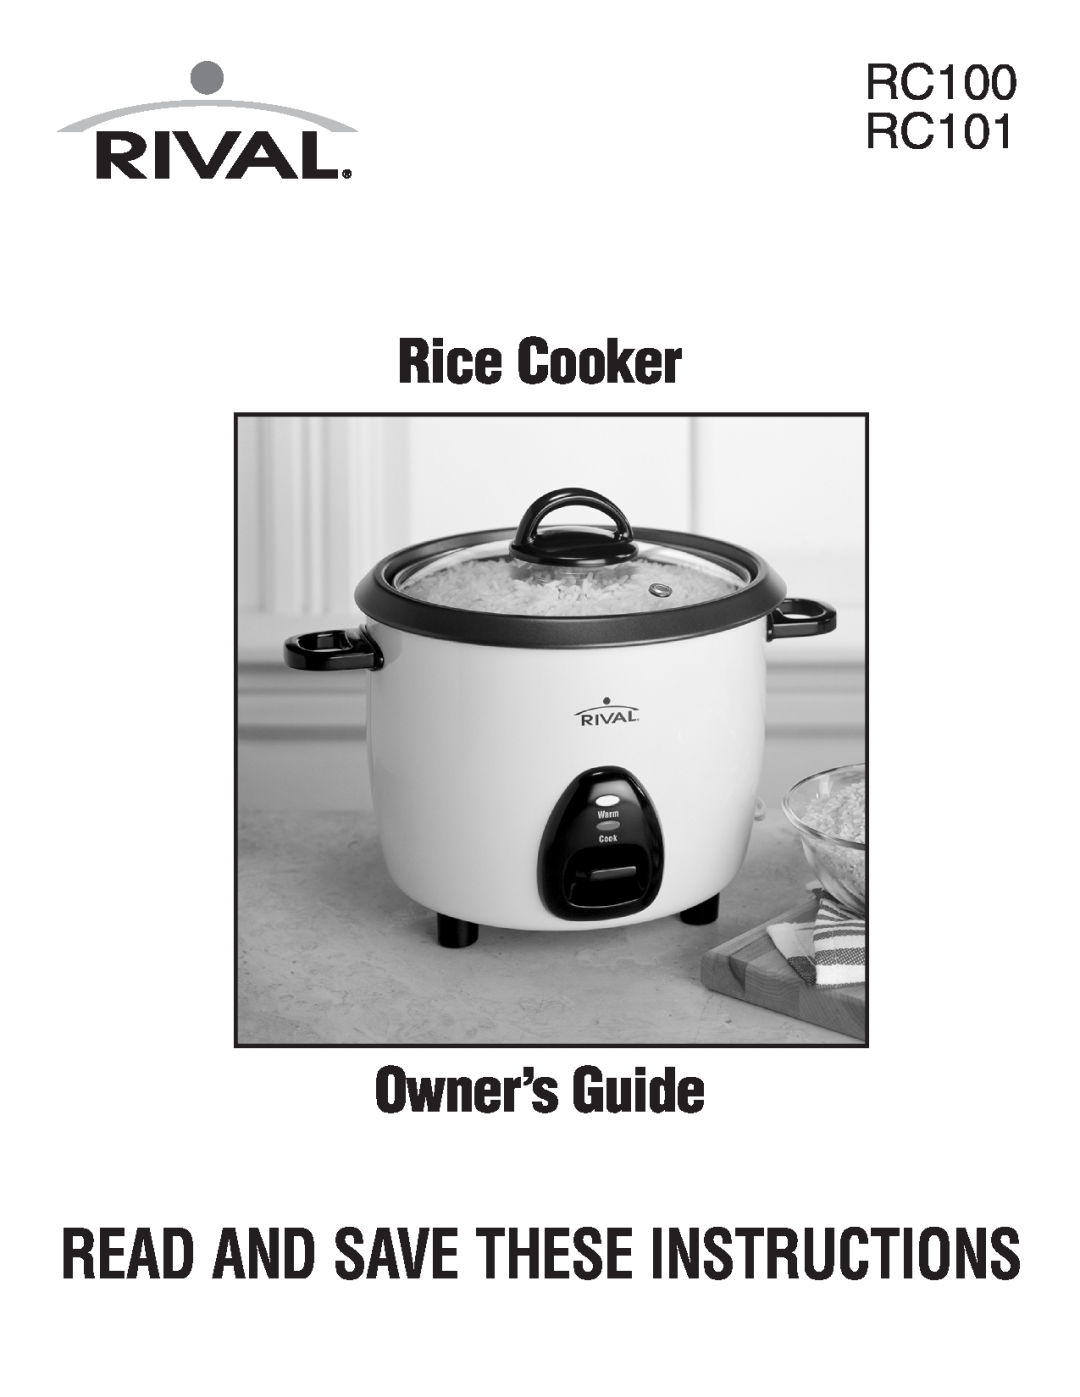 Rival manual Rice Cooker Owner’sGuide, Read And Save These Instructions, RC100 RC101 